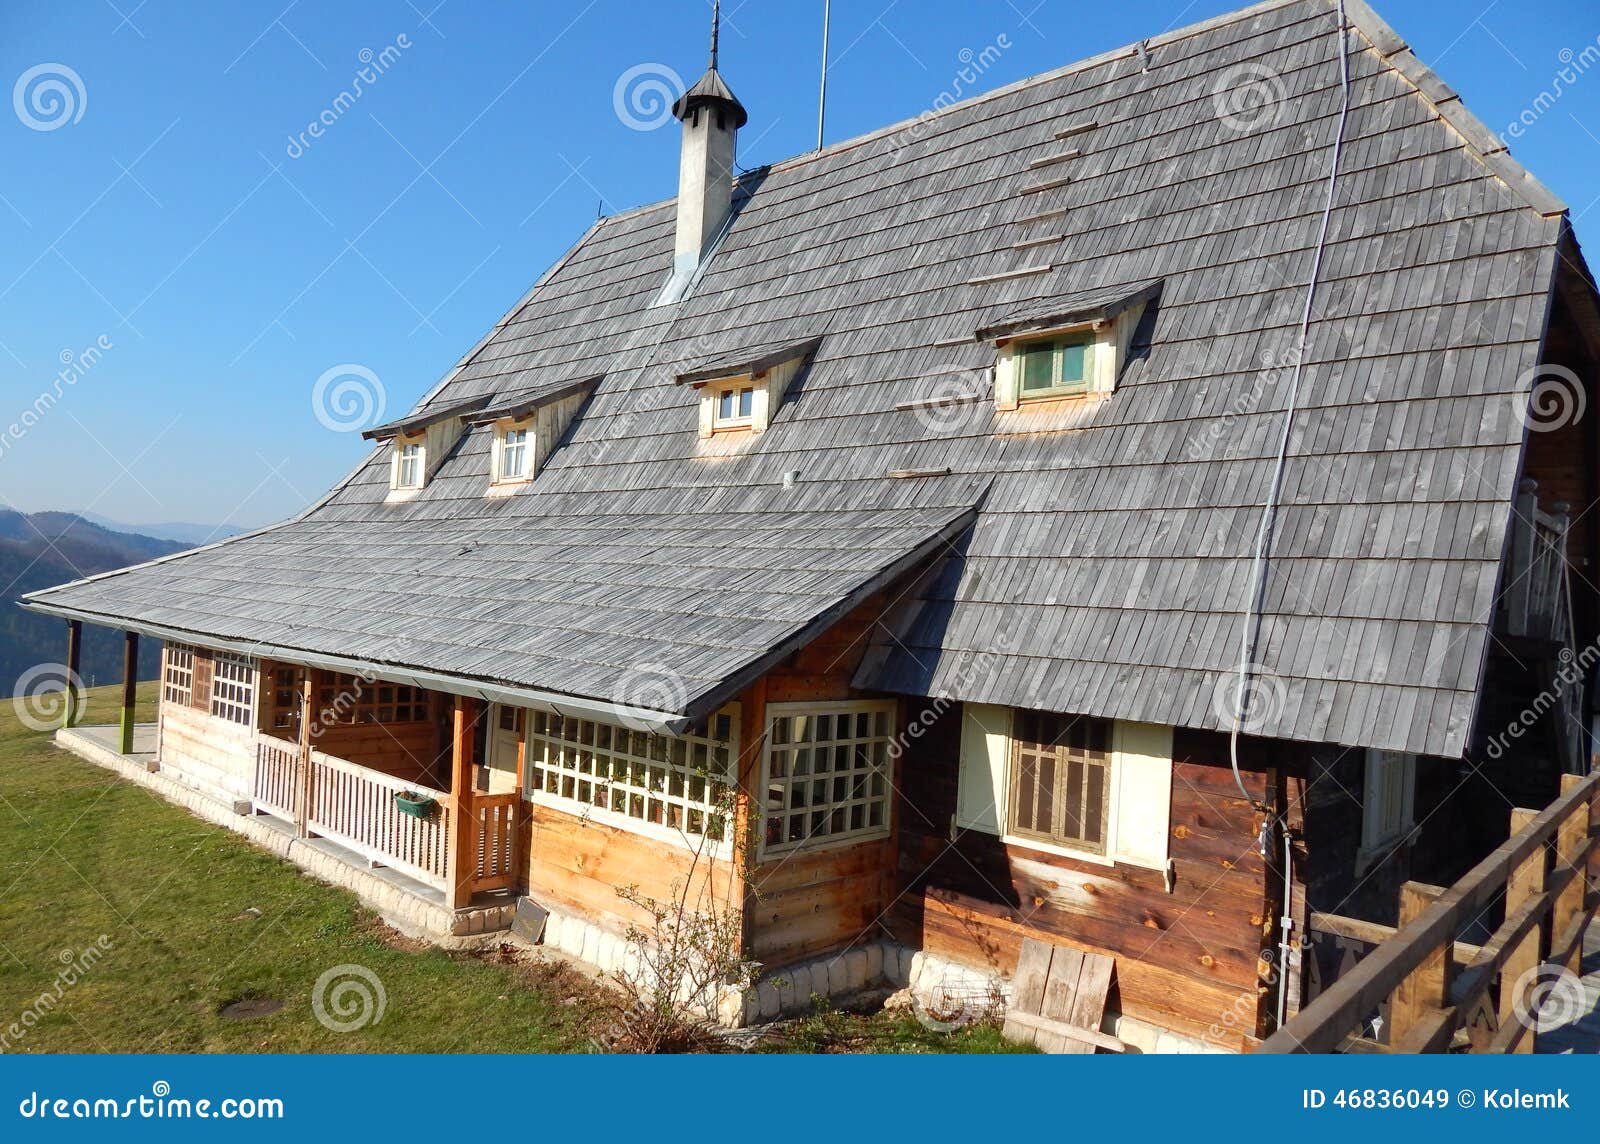 Big wooden house stock image. Image of rural, nature - 46836049